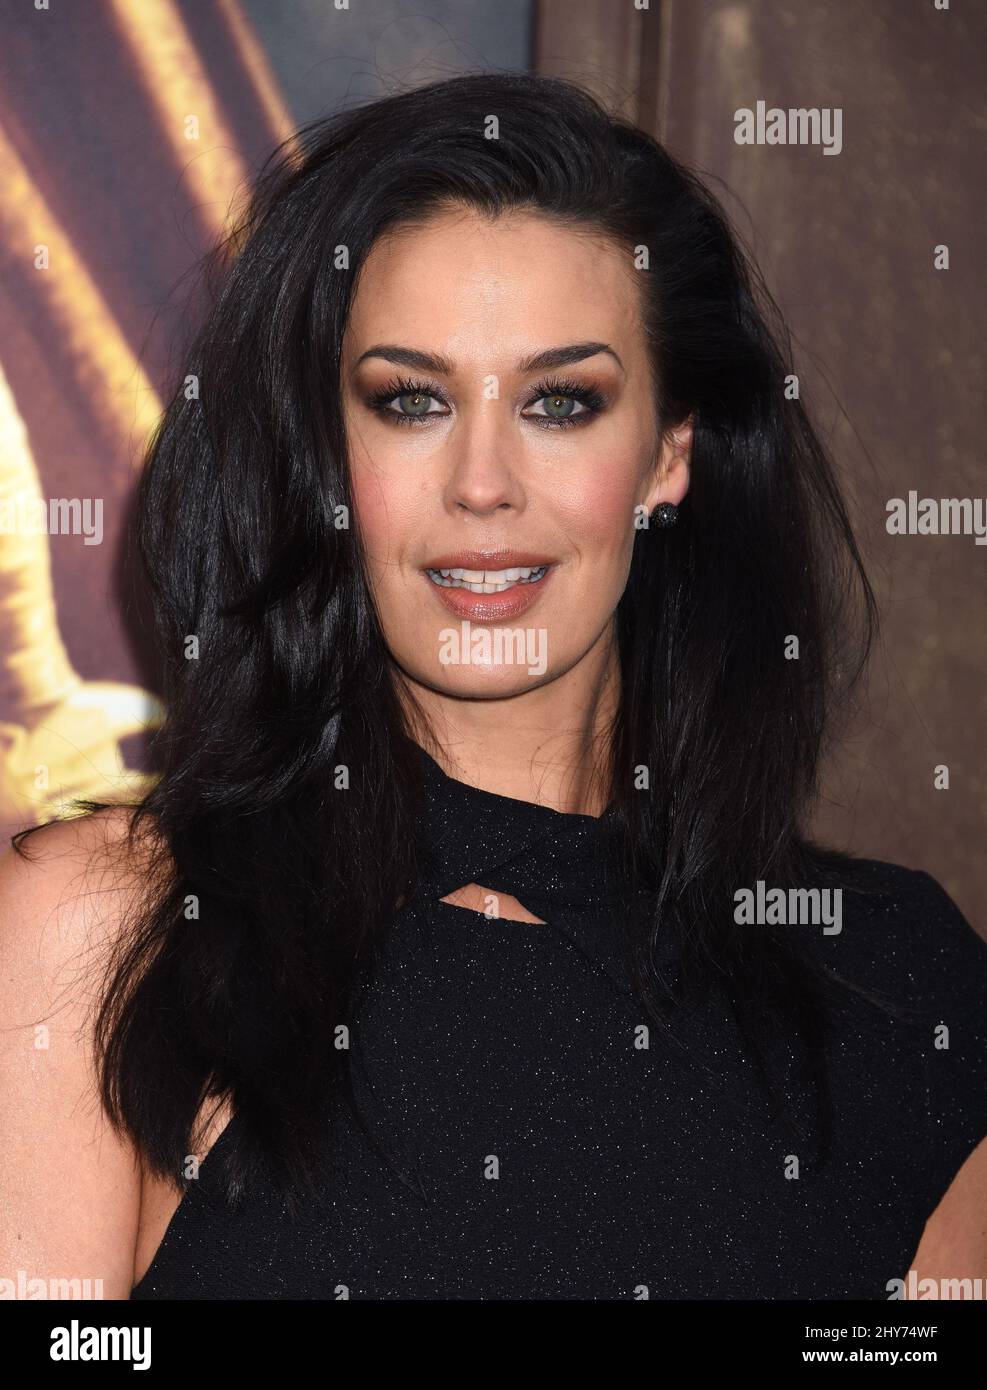 Megan Gale attends 'Mad Max:Fury Road' premiere held at the TCL Chinese Theatre Stock Photo